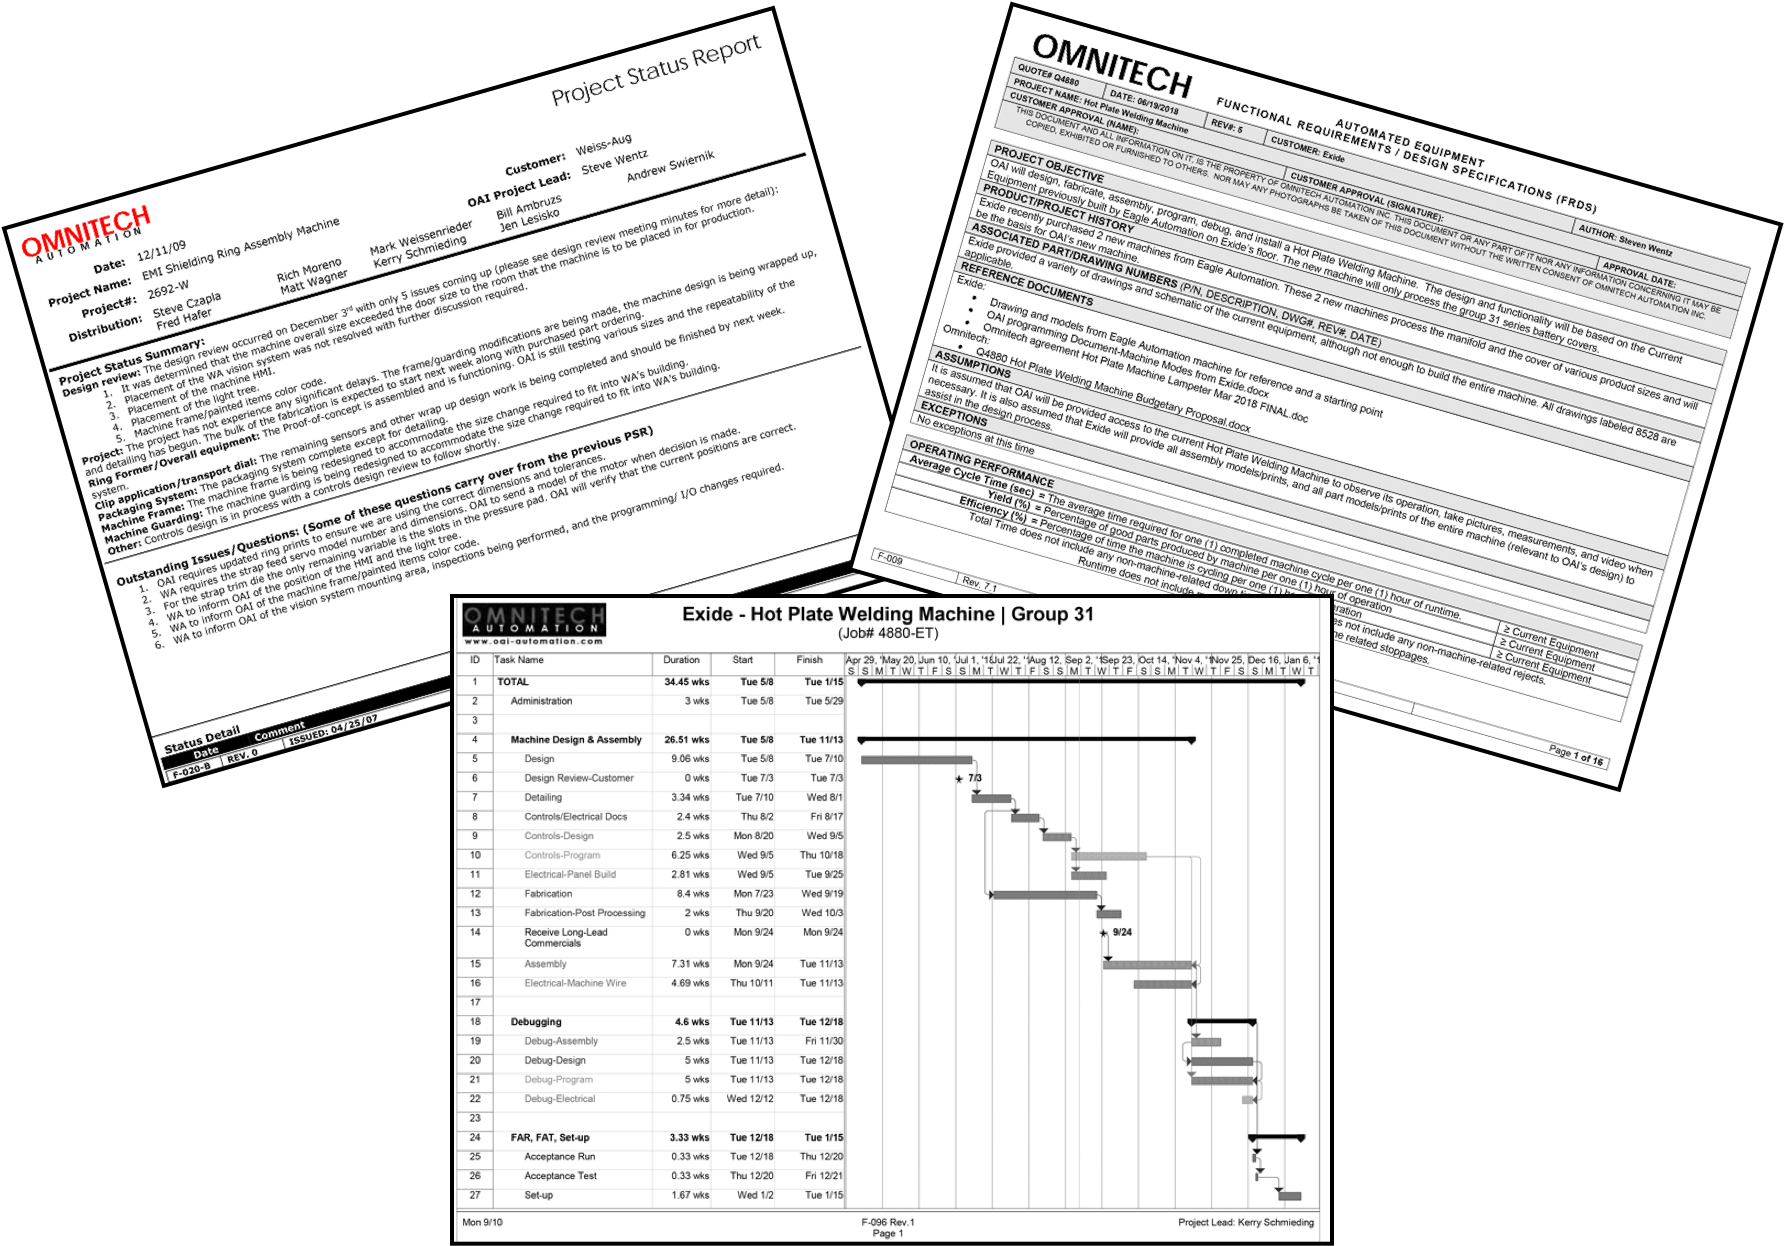 Collage of project management documents